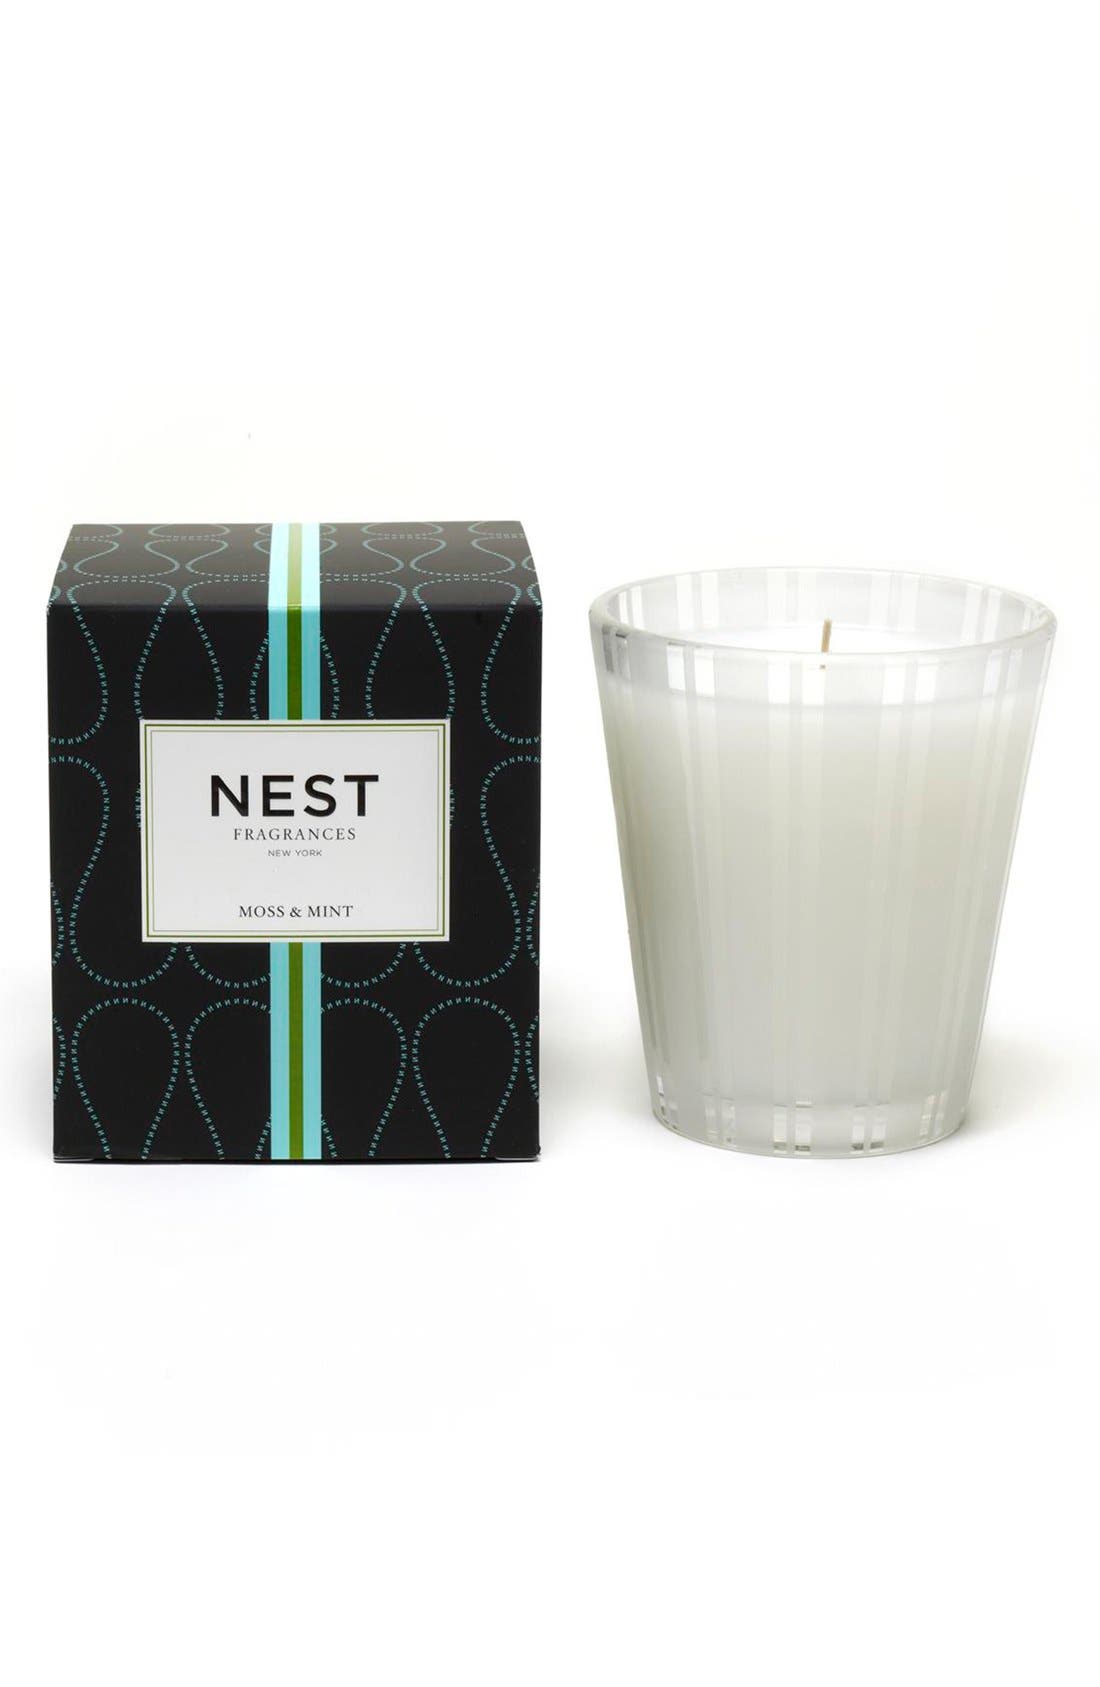 Nest Fragrances Moss & Mint Scented Candle